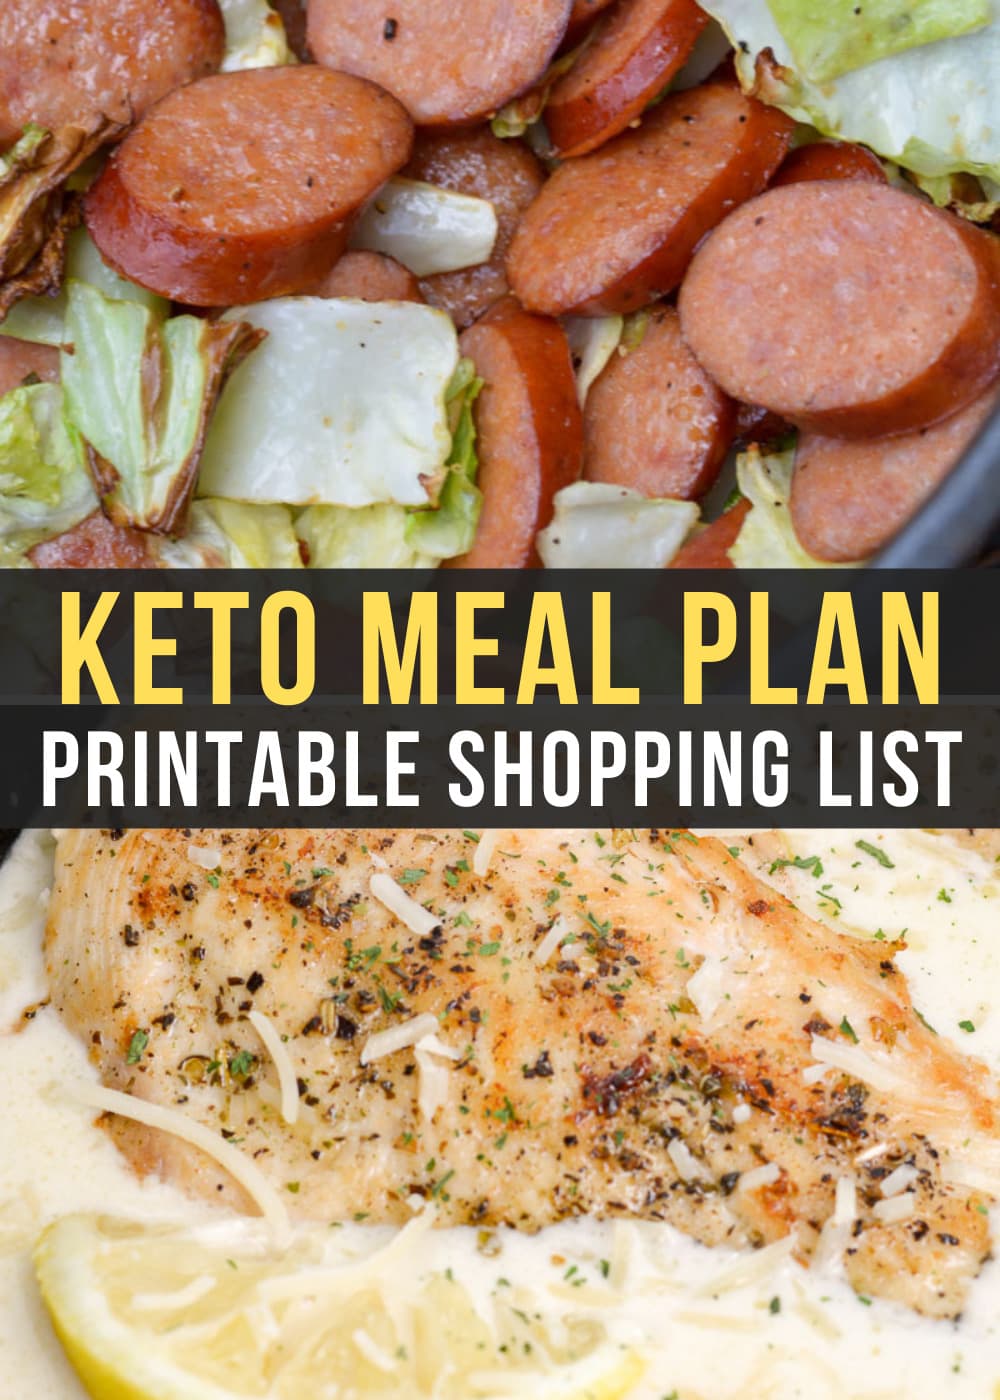 Enjoy 5 keto dinners and a low-carb meal prep breakfast recipe in this Easy Keto Meal Plan! Printable shopping list, keto meal prep tips, side suggestions, and net carb counts are included!